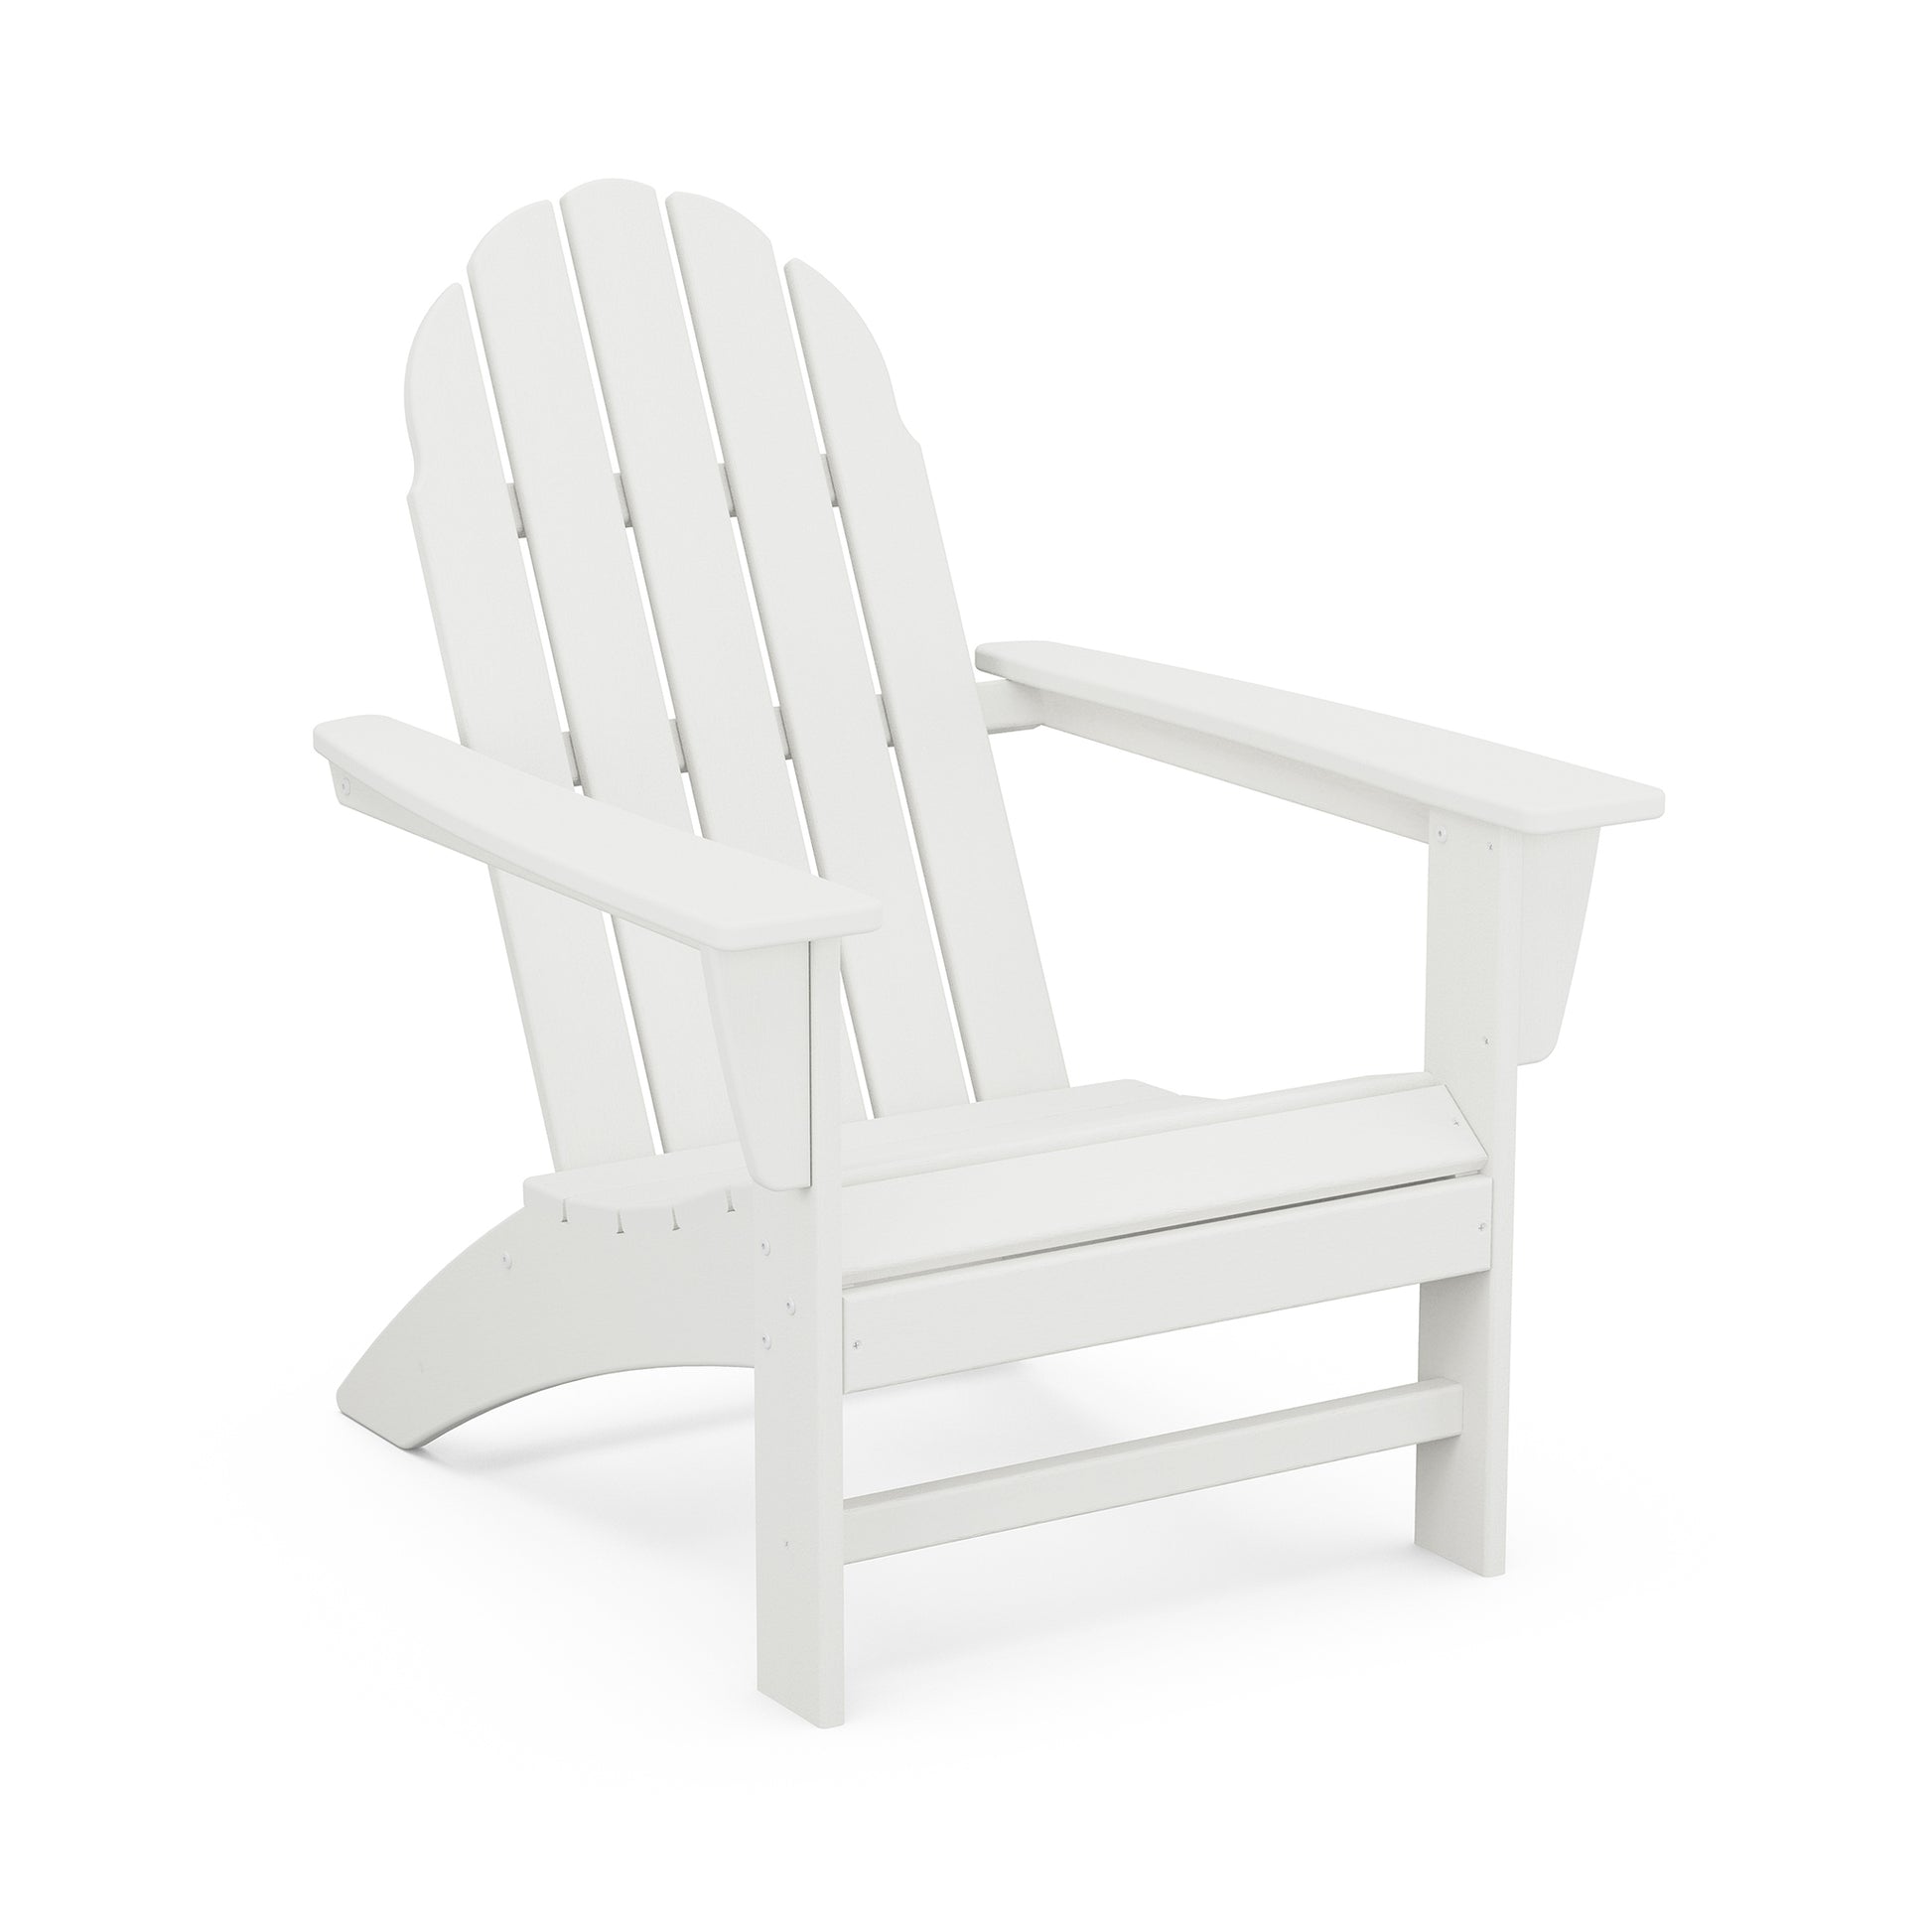 POLYWOOD Vineyard Adirondack chair made of POLYWOOD®, isolated on a white background with a slight shadow beneath, showcasing its wide armrests and slatted back design.